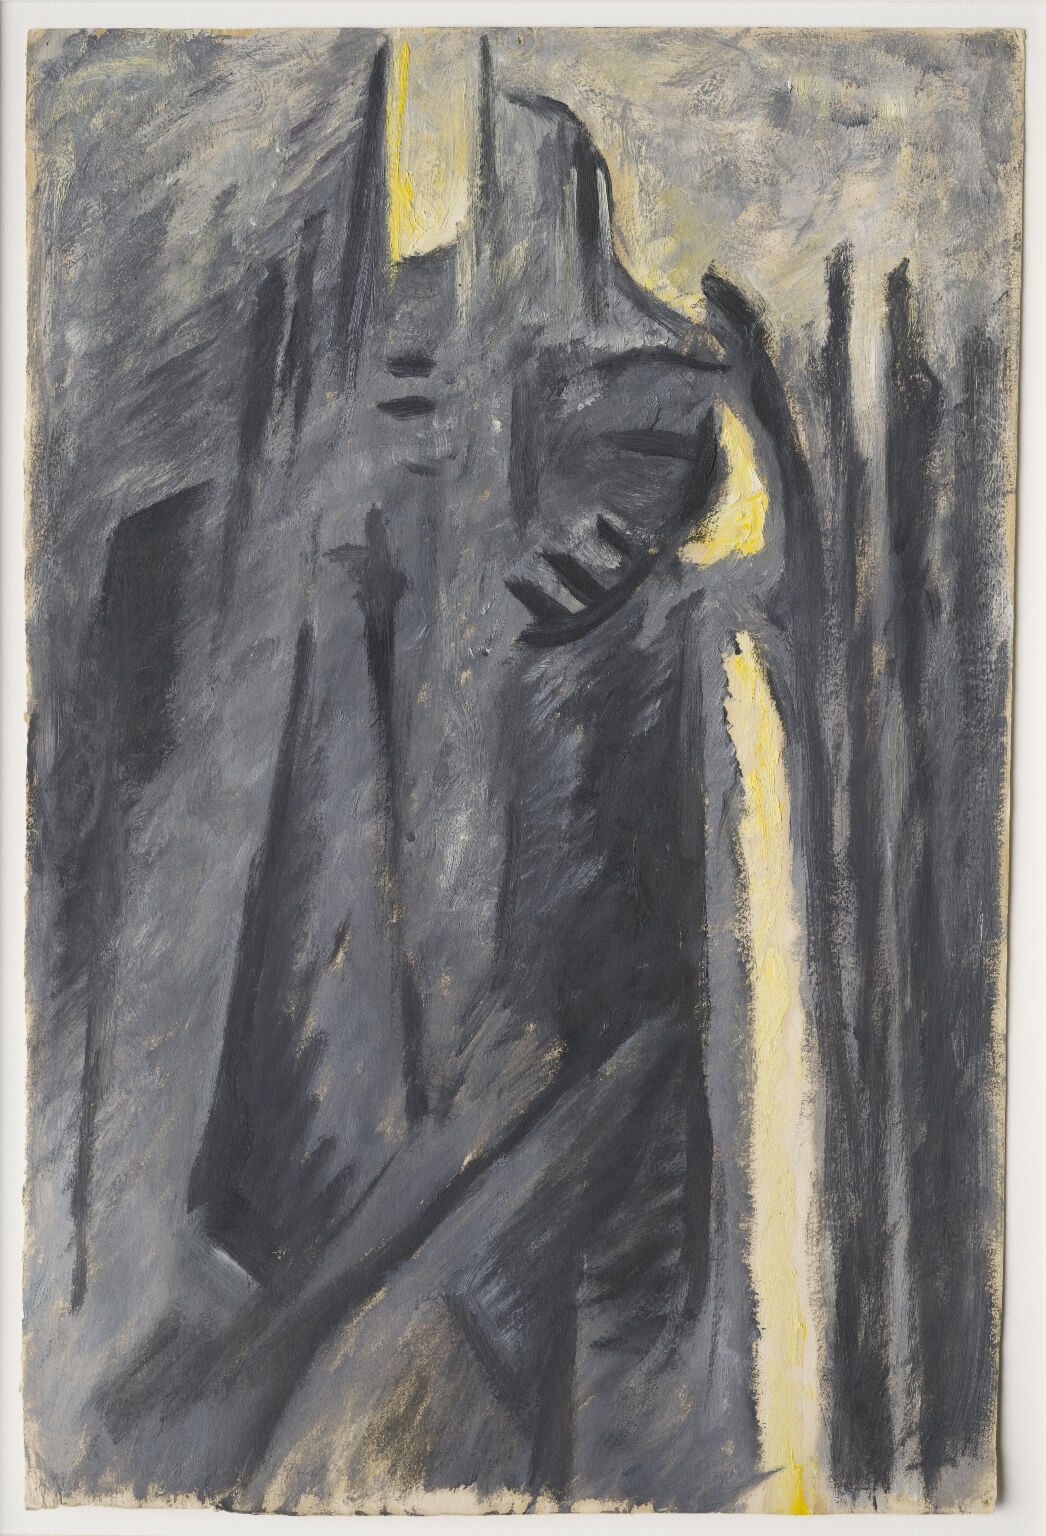 Abstract oil painting on paper mostly made with shades of light and dark gray, with an abstracted human-like figure, vertical lines, and a yellow line moving upwards